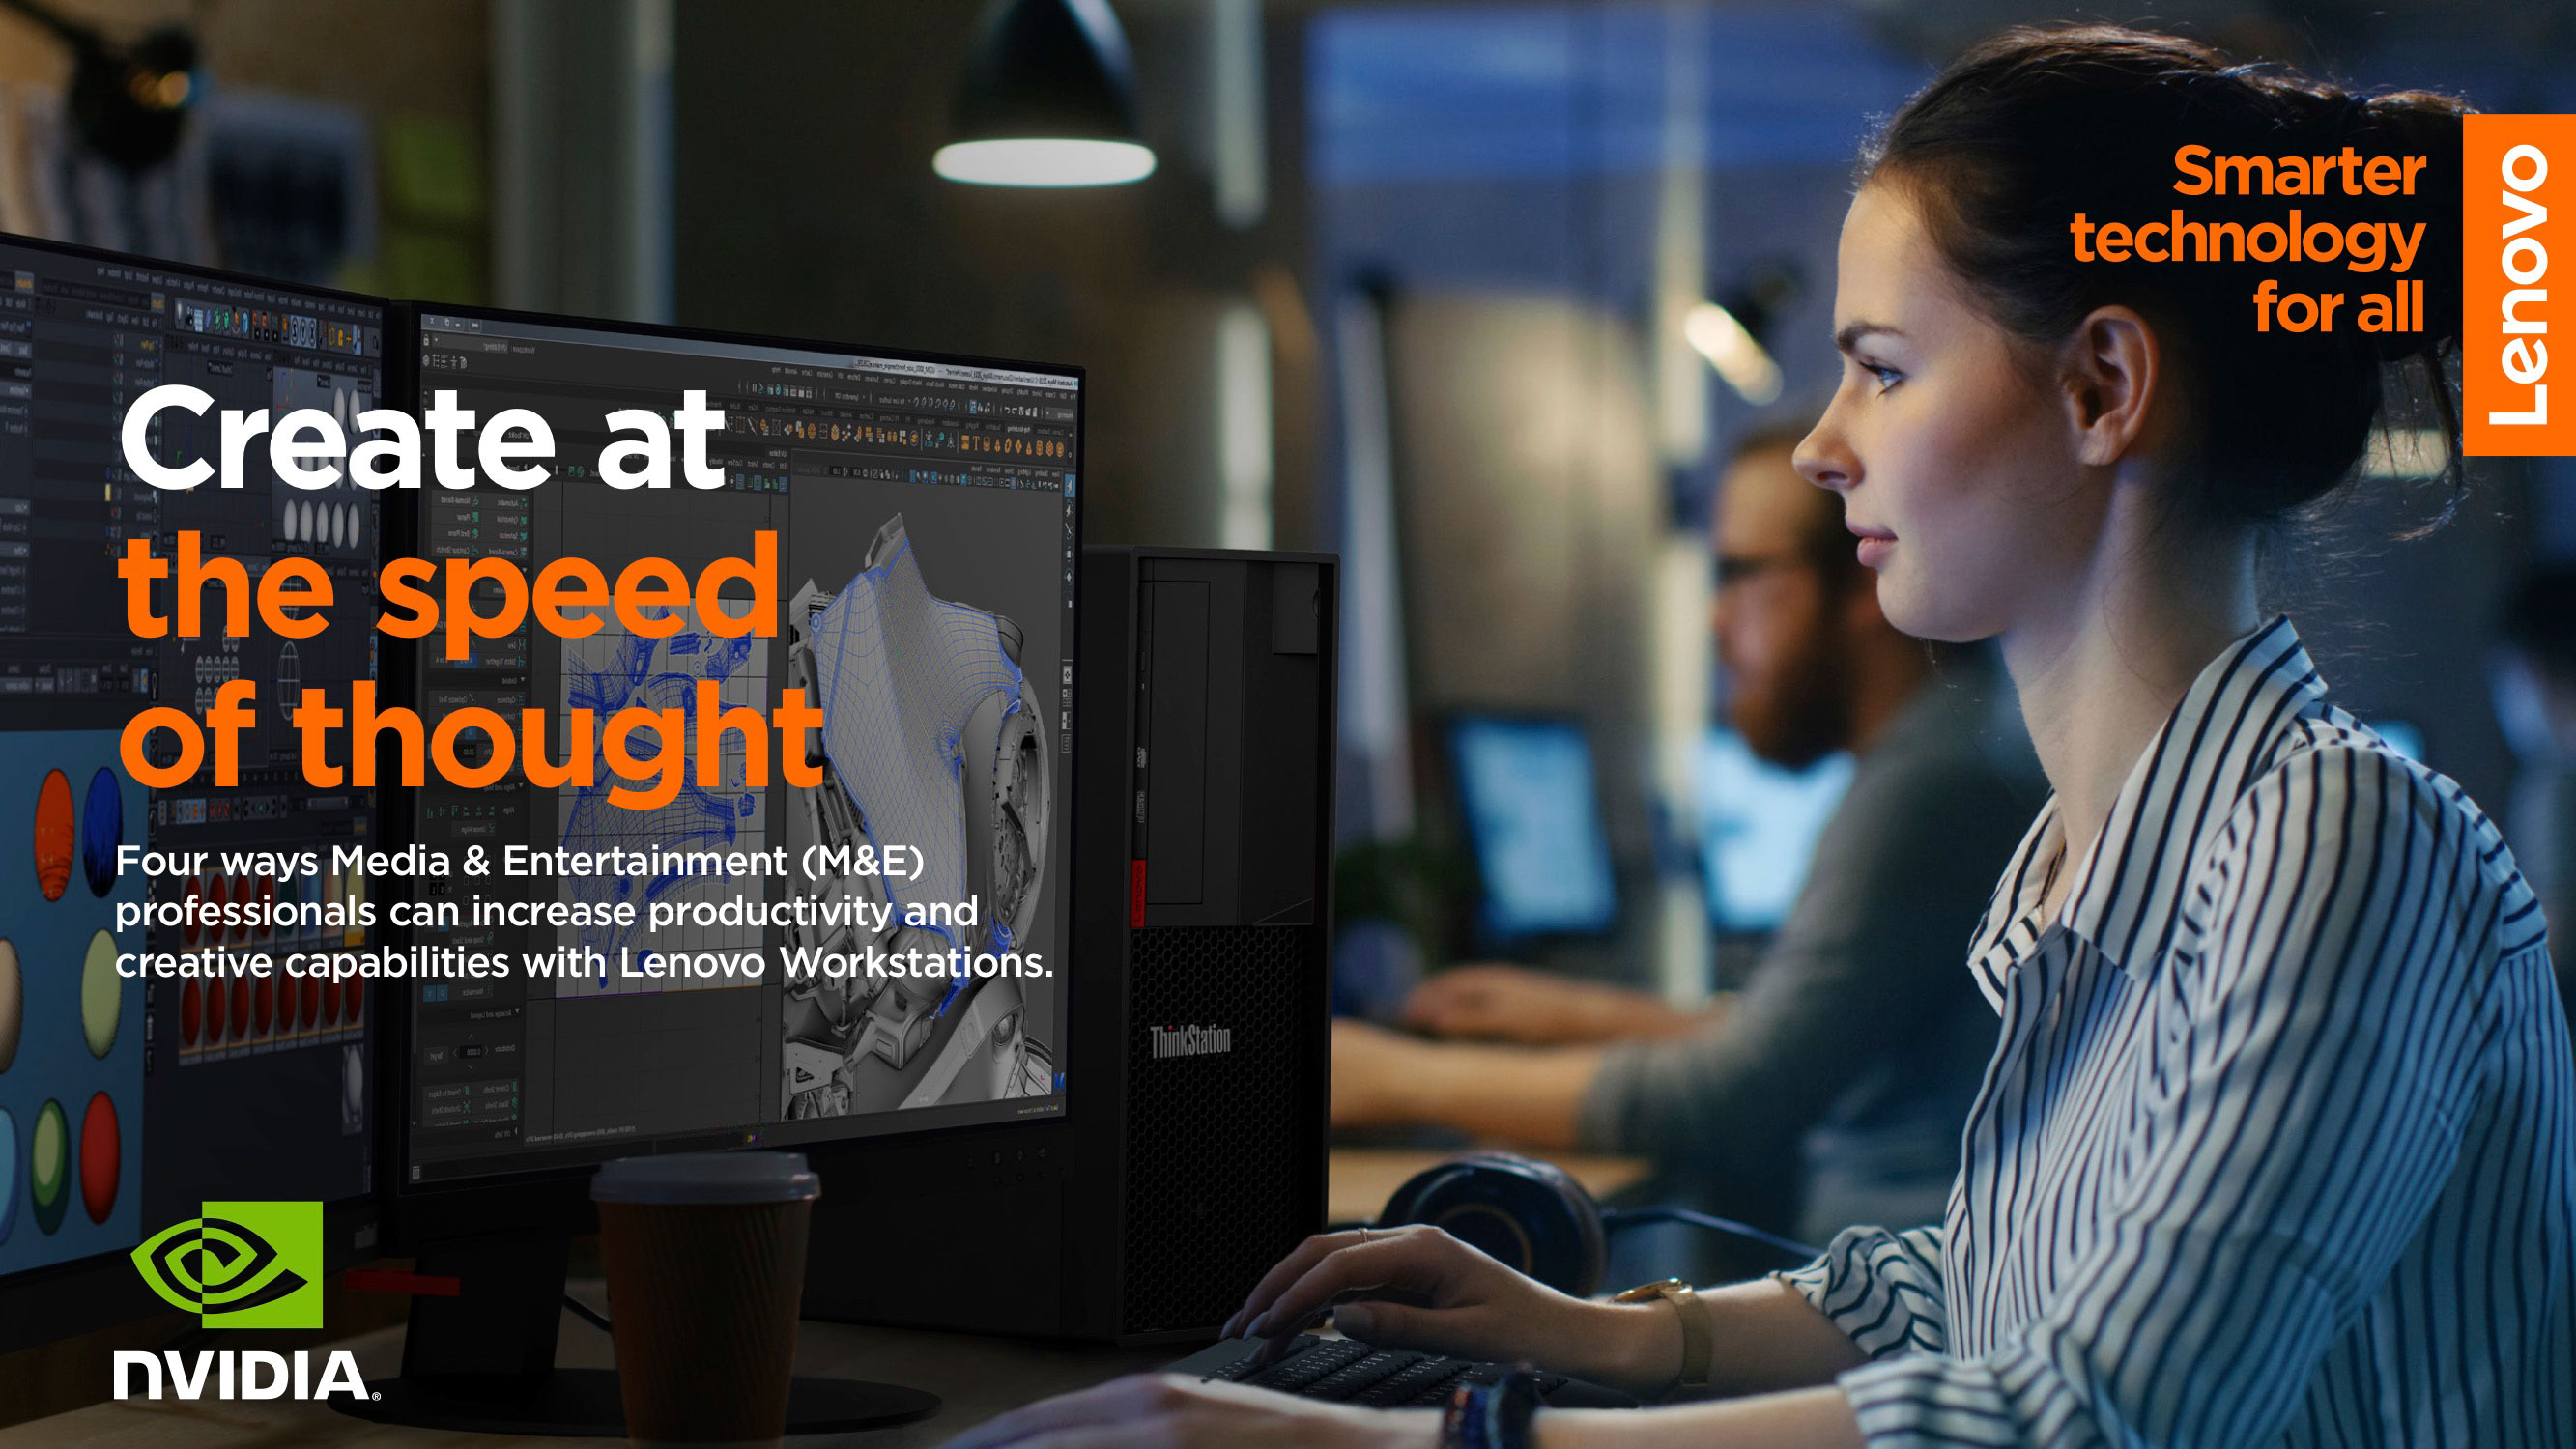 Find out how Lenovo Workstations increase creative efficiency